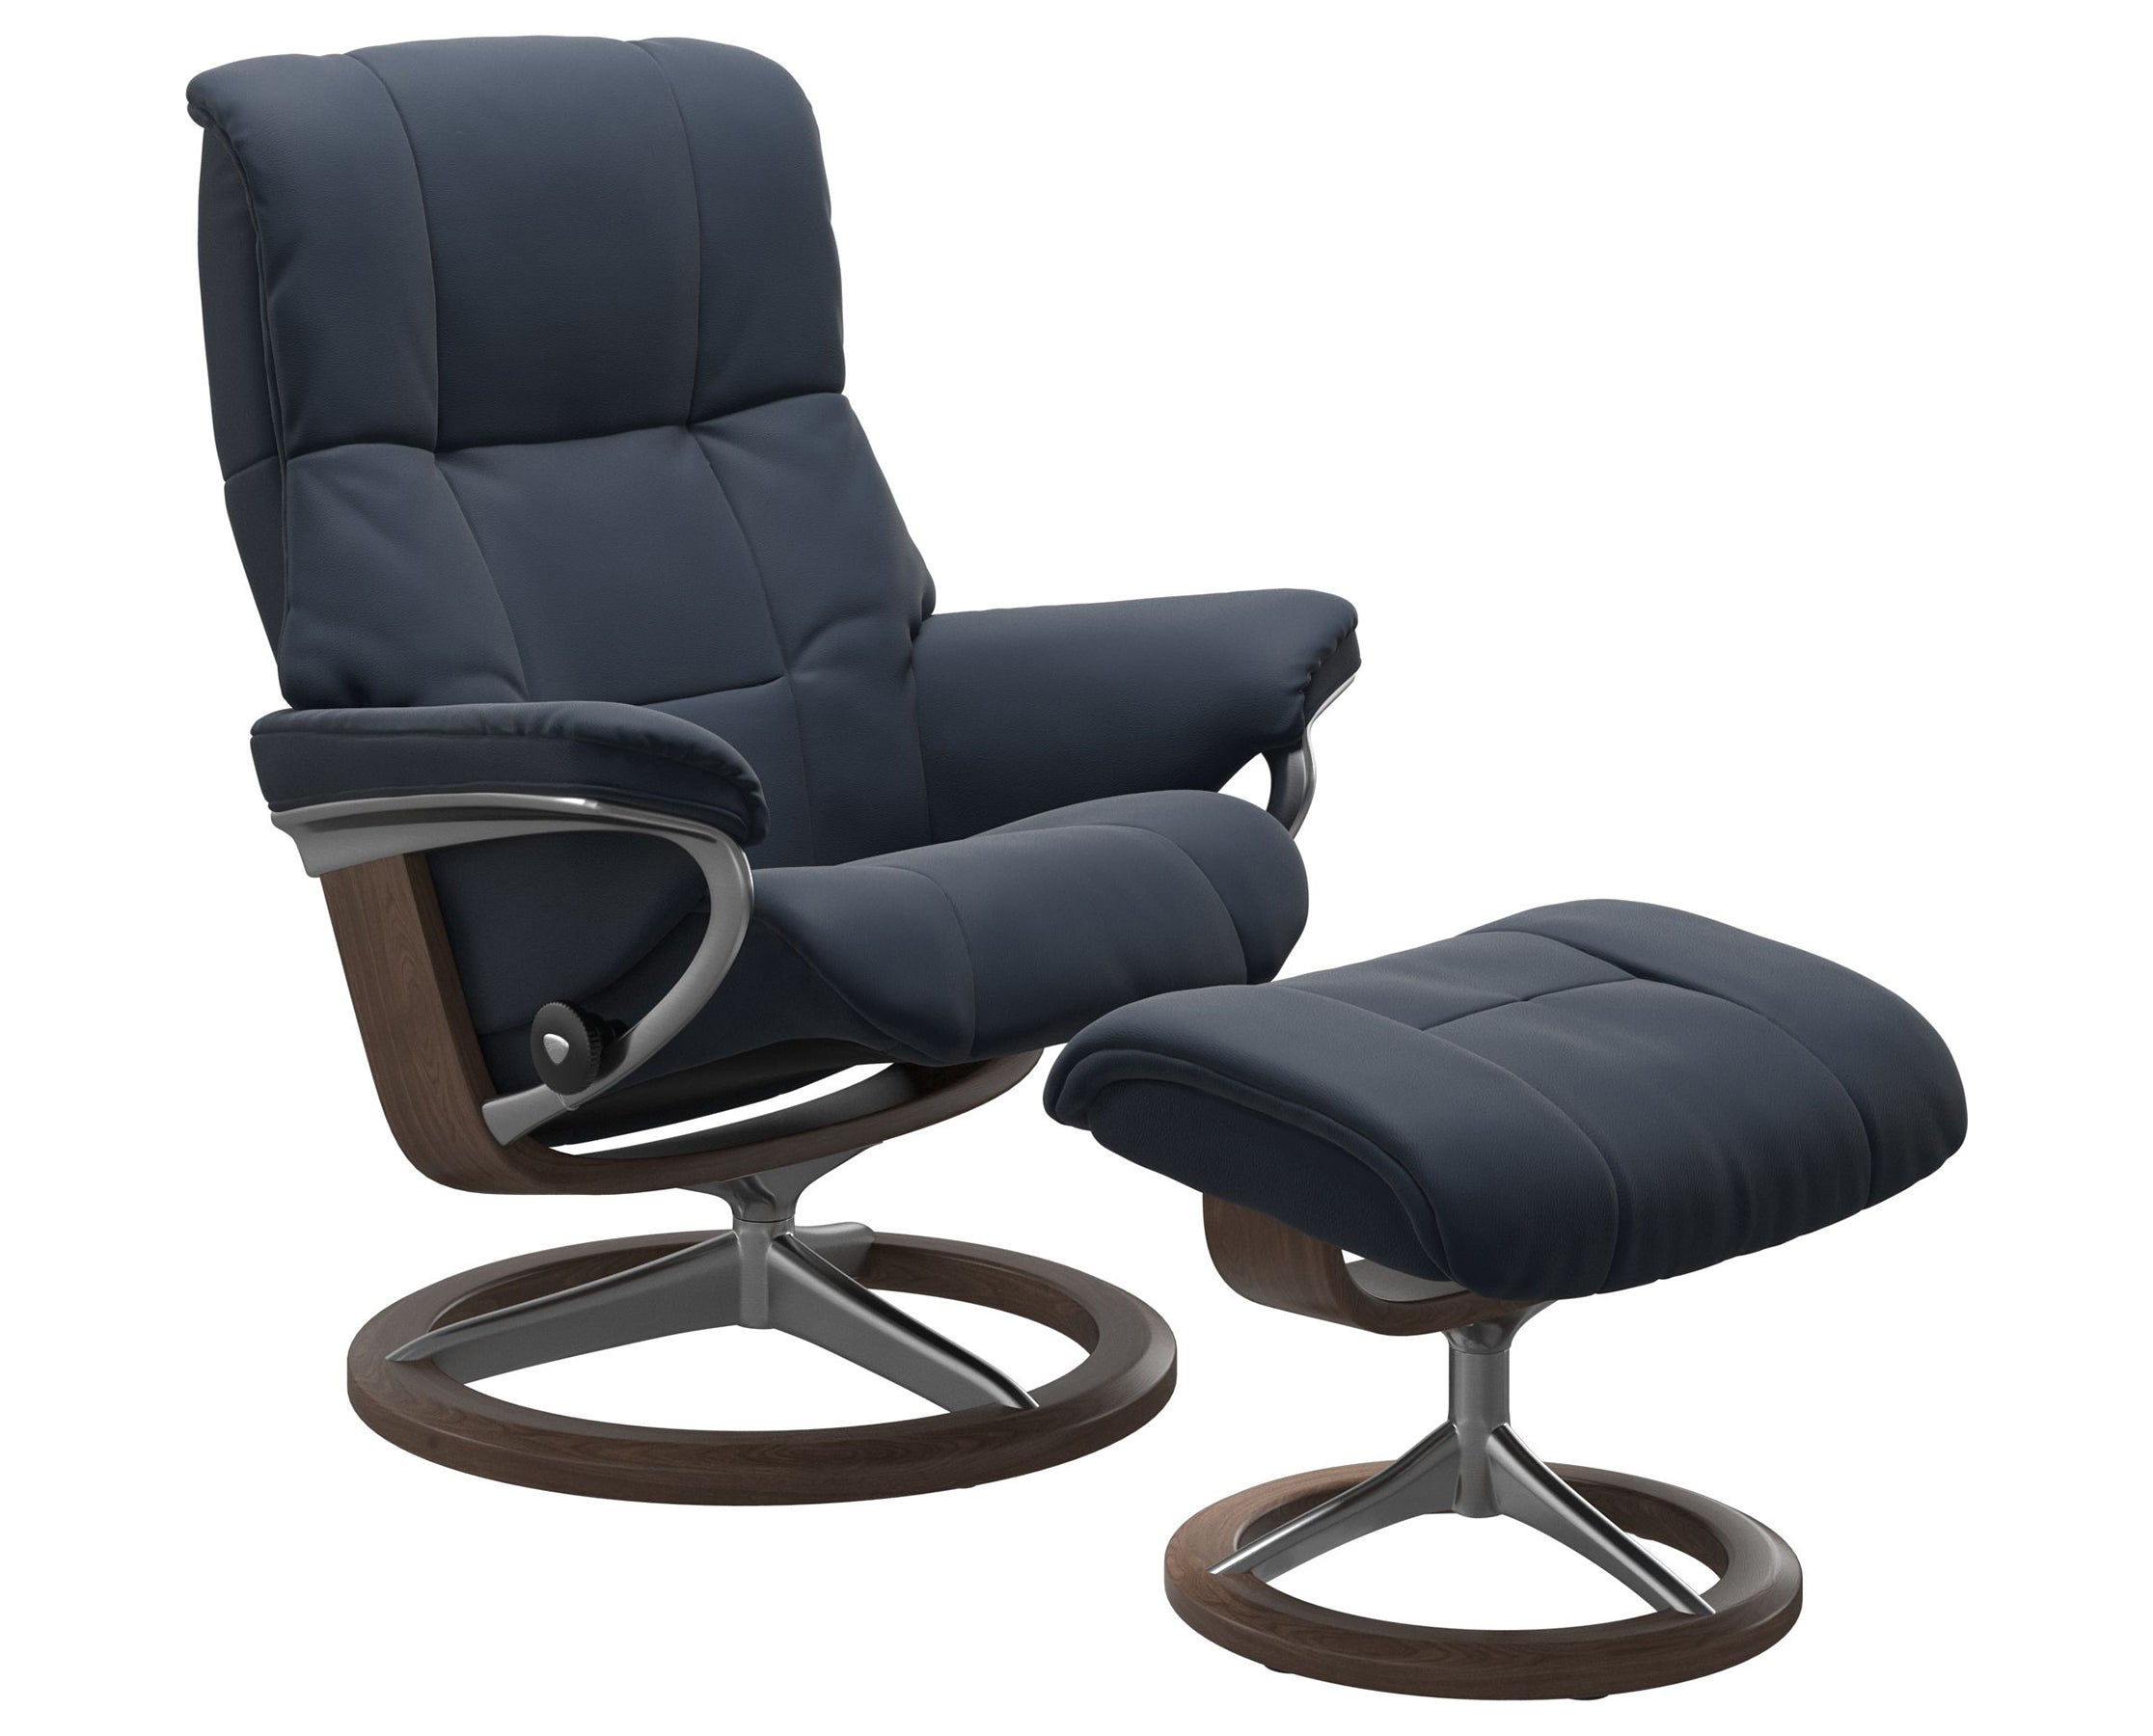 Paloma Leather Oxford Blue S/M/L and Walnut Base | Stressless Mayfair Signature Recliner | Valley Ridge Furniture